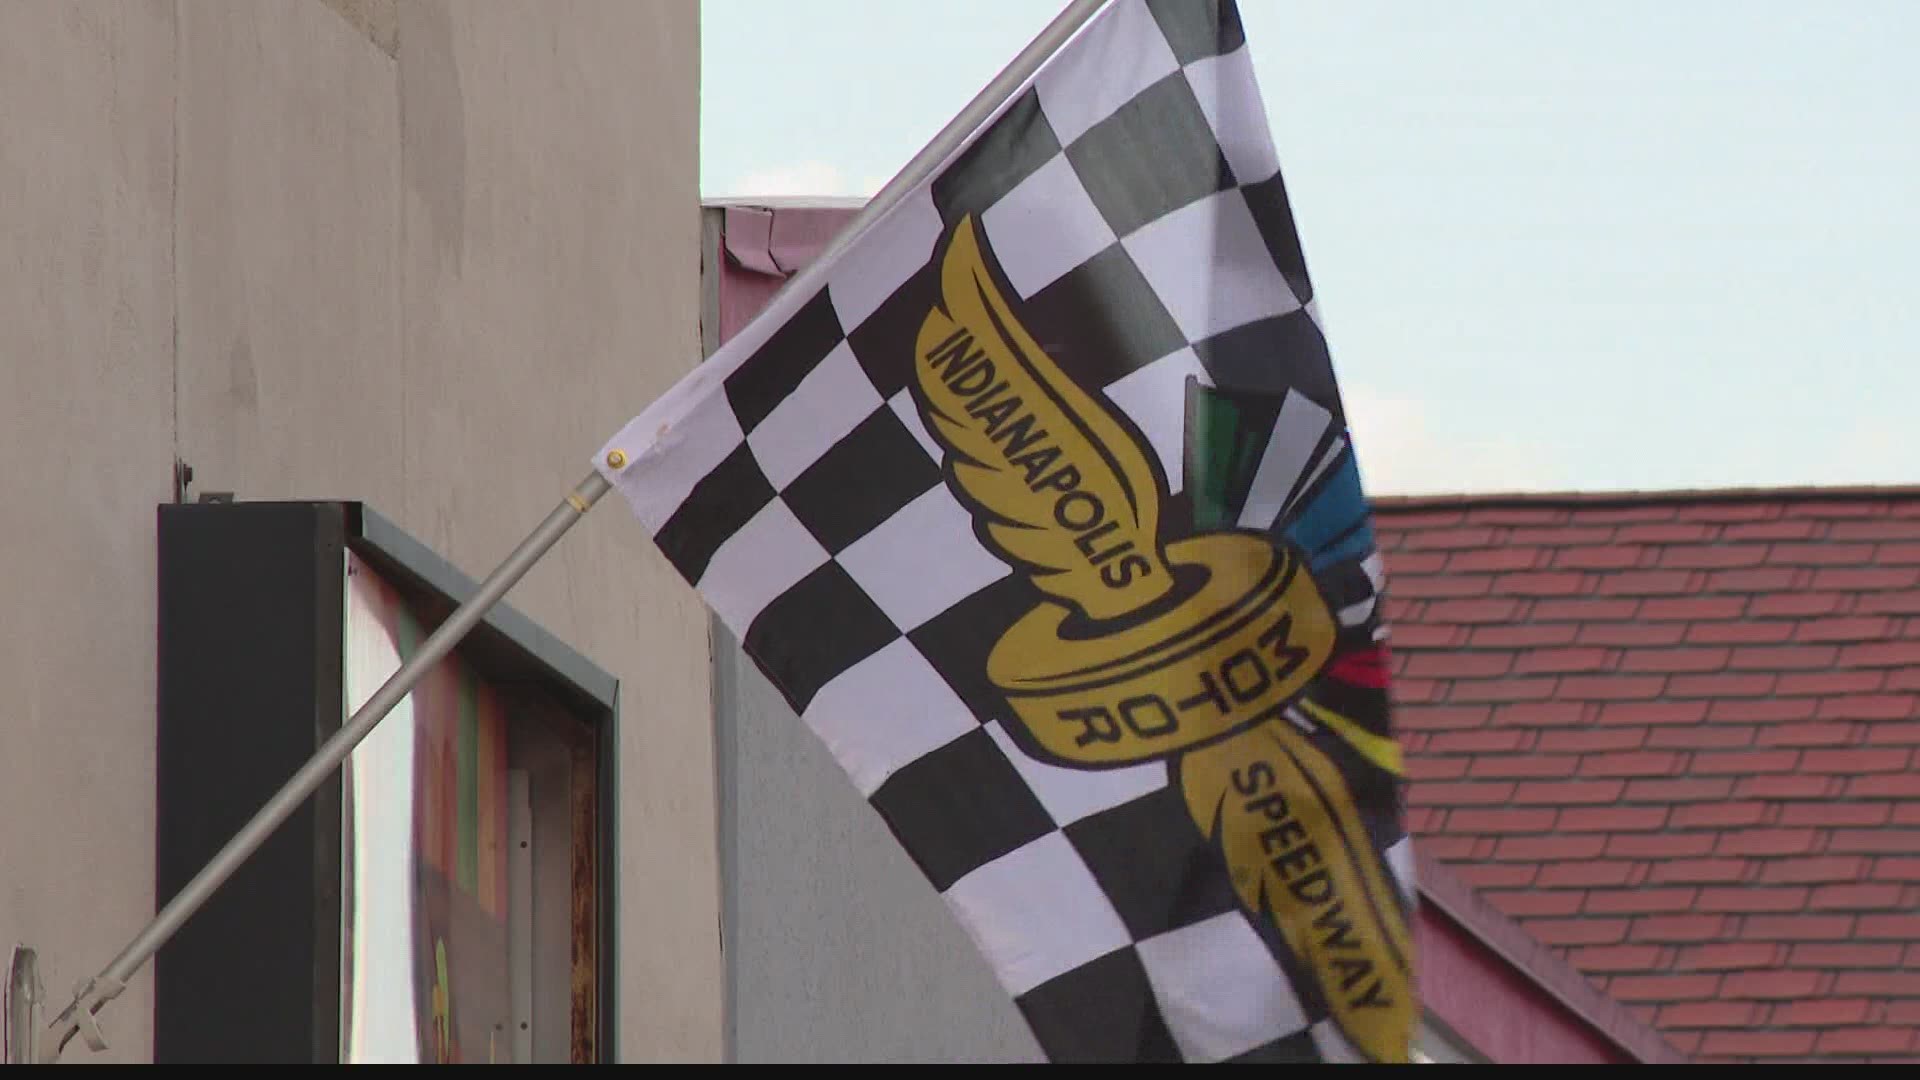 Even though they've made safety changes at IMS, IU Health said they have concerns about thousands of fans coming to the Indy 500.